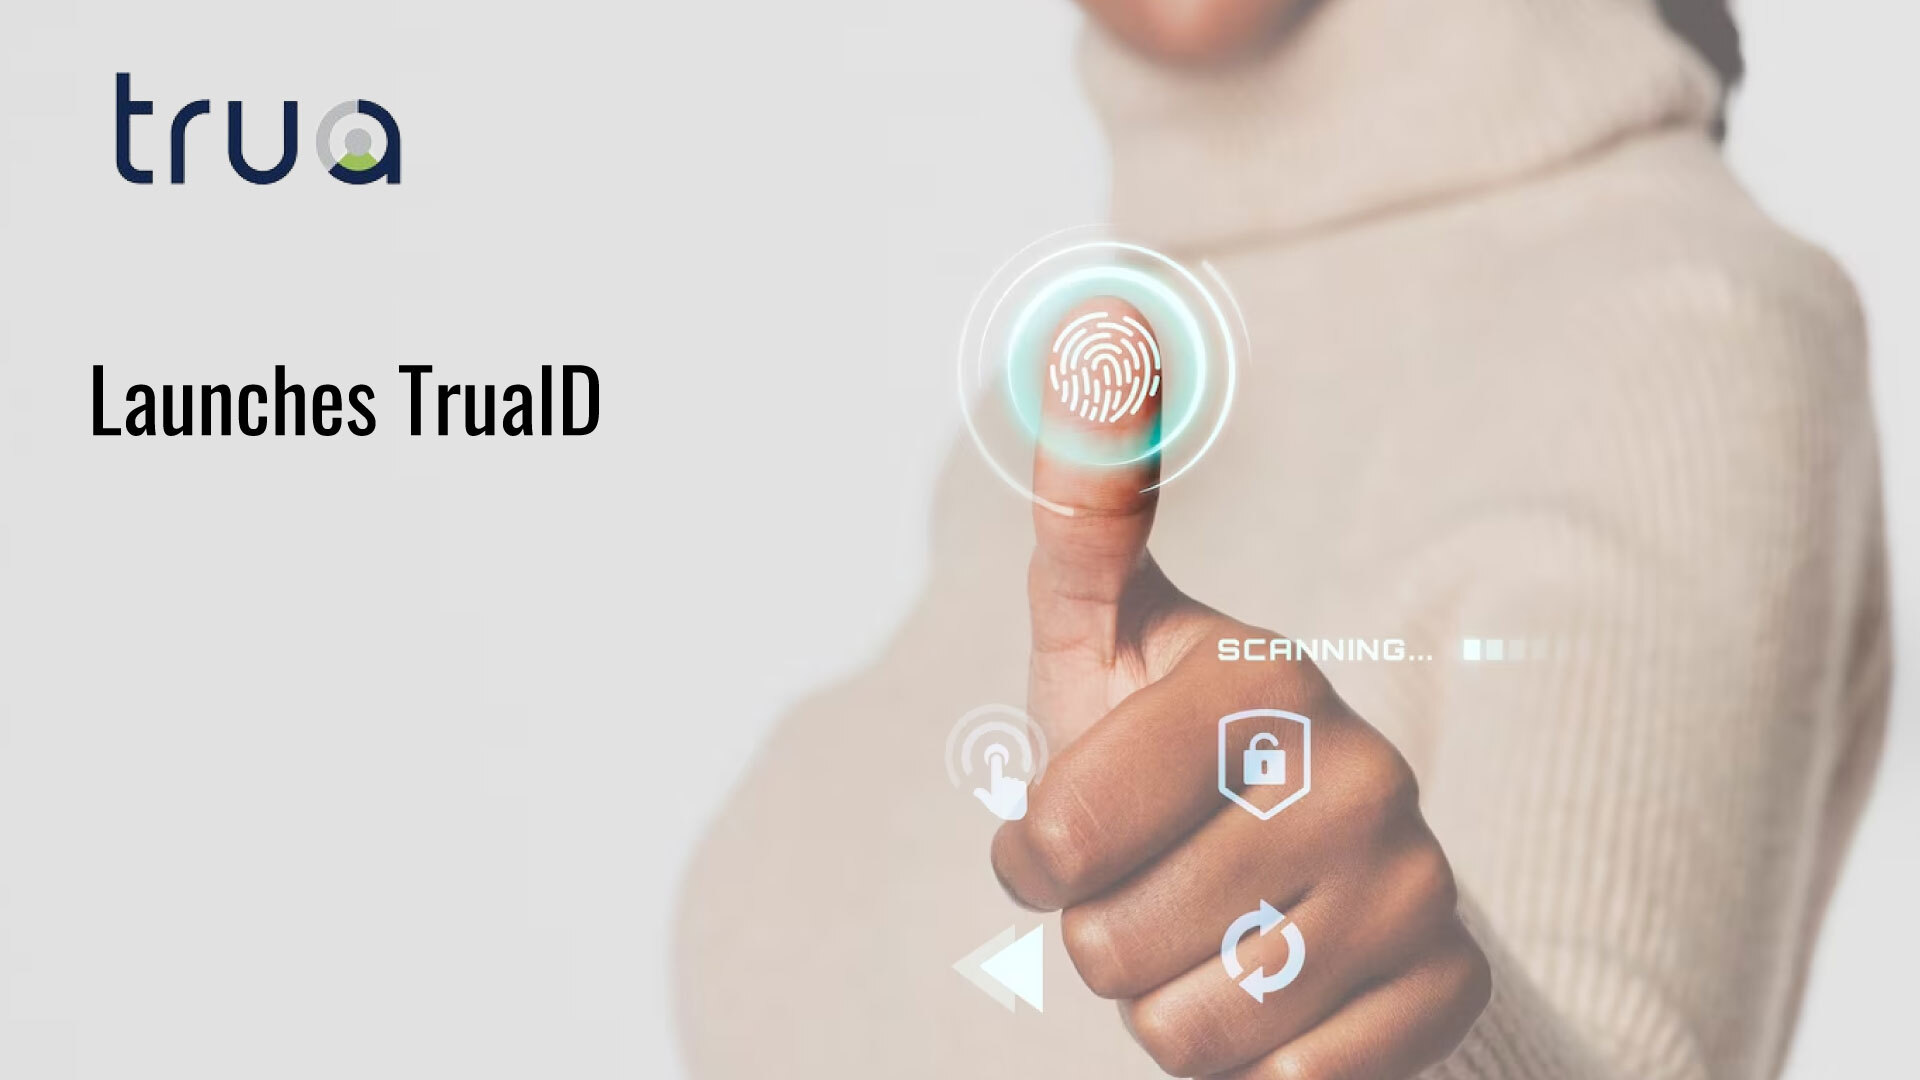 Trua Launches TruaID, A Verified Digital ID That Helps Consumers Keep Personal Information Secure